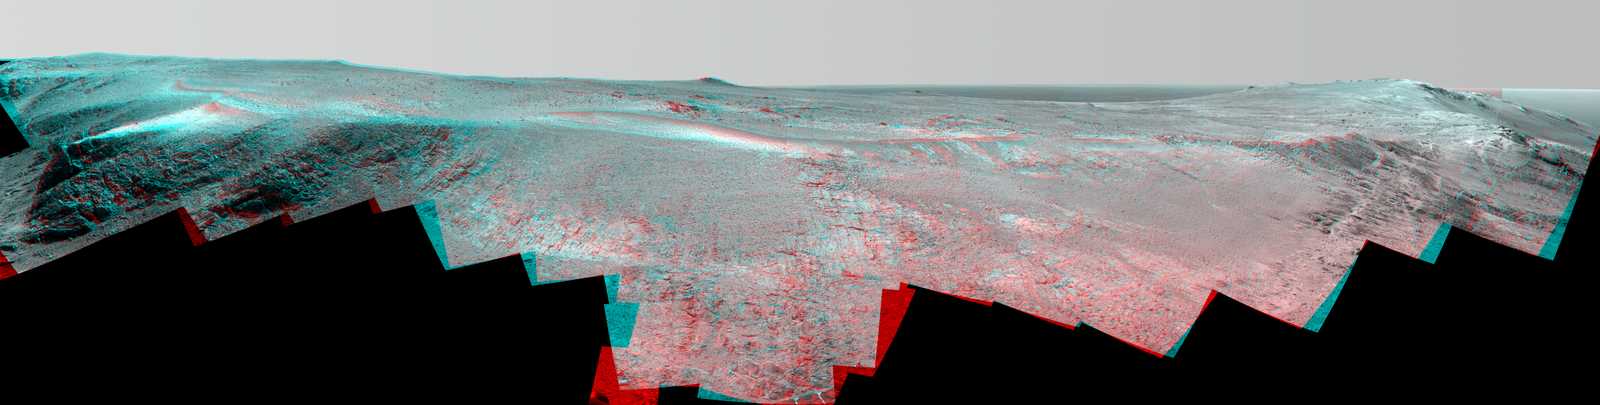 A grooved ridge called "Rocheport" on the rim of Mars' Endeavour Crater spans this stereo scene from NASA's Mars rover Opportunity. The view combines images from left eye and right eye of the rover's Pancam to appear three-dimensional when seen through blue-red glasses with the red lens on the left.